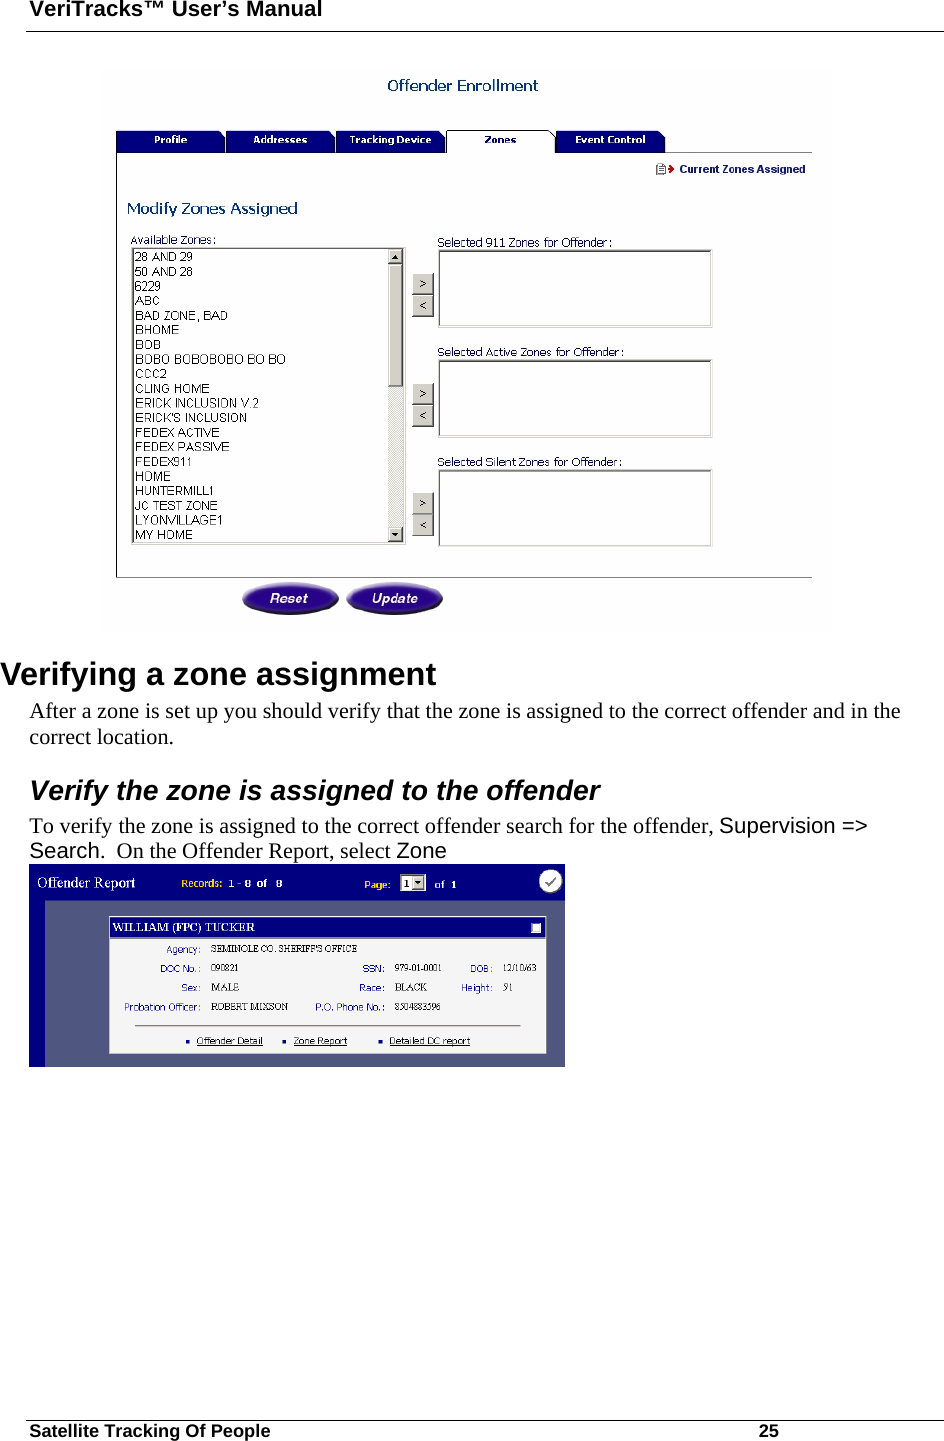 VeriTracks™ User’s Manual Satellite Tracking Of People       25  Verifying a zone assignment After a zone is set up you should verify that the zone is assigned to the correct offender and in the correct location. Verify the zone is assigned to the offender To verify the zone is assigned to the correct offender search for the offender, Supervision =&gt; Search.  On the Offender Report, select Zone     